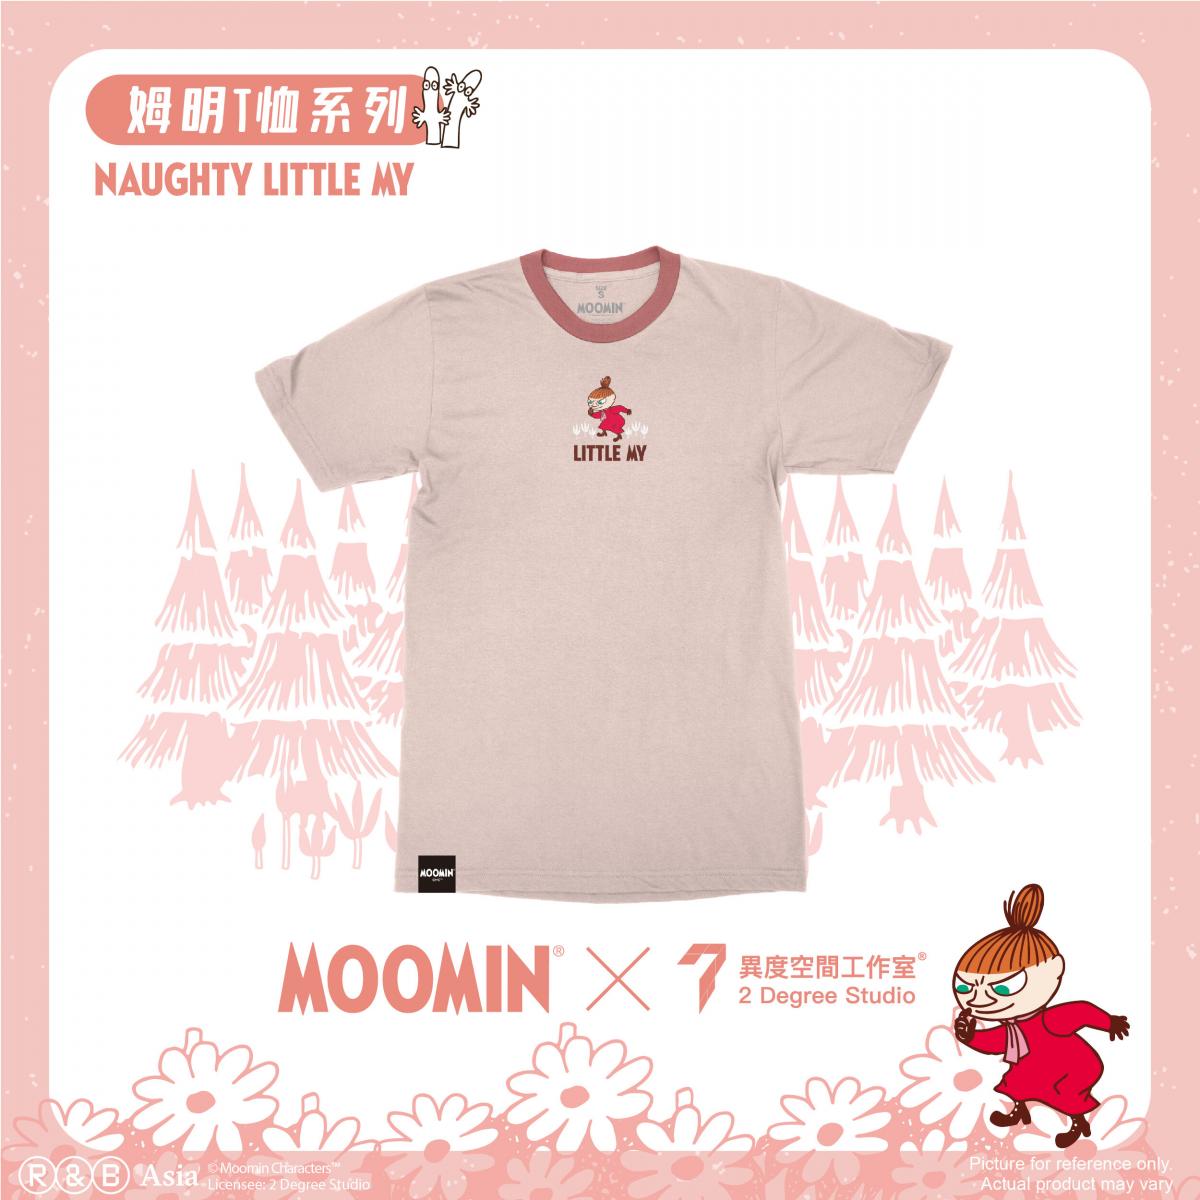 fossil overdraw Foragt 2 Degree Studio | Moomin T-Shirt - Naughty Little My | Size : L | HKTVmall  The Largest HK Shopping Platform